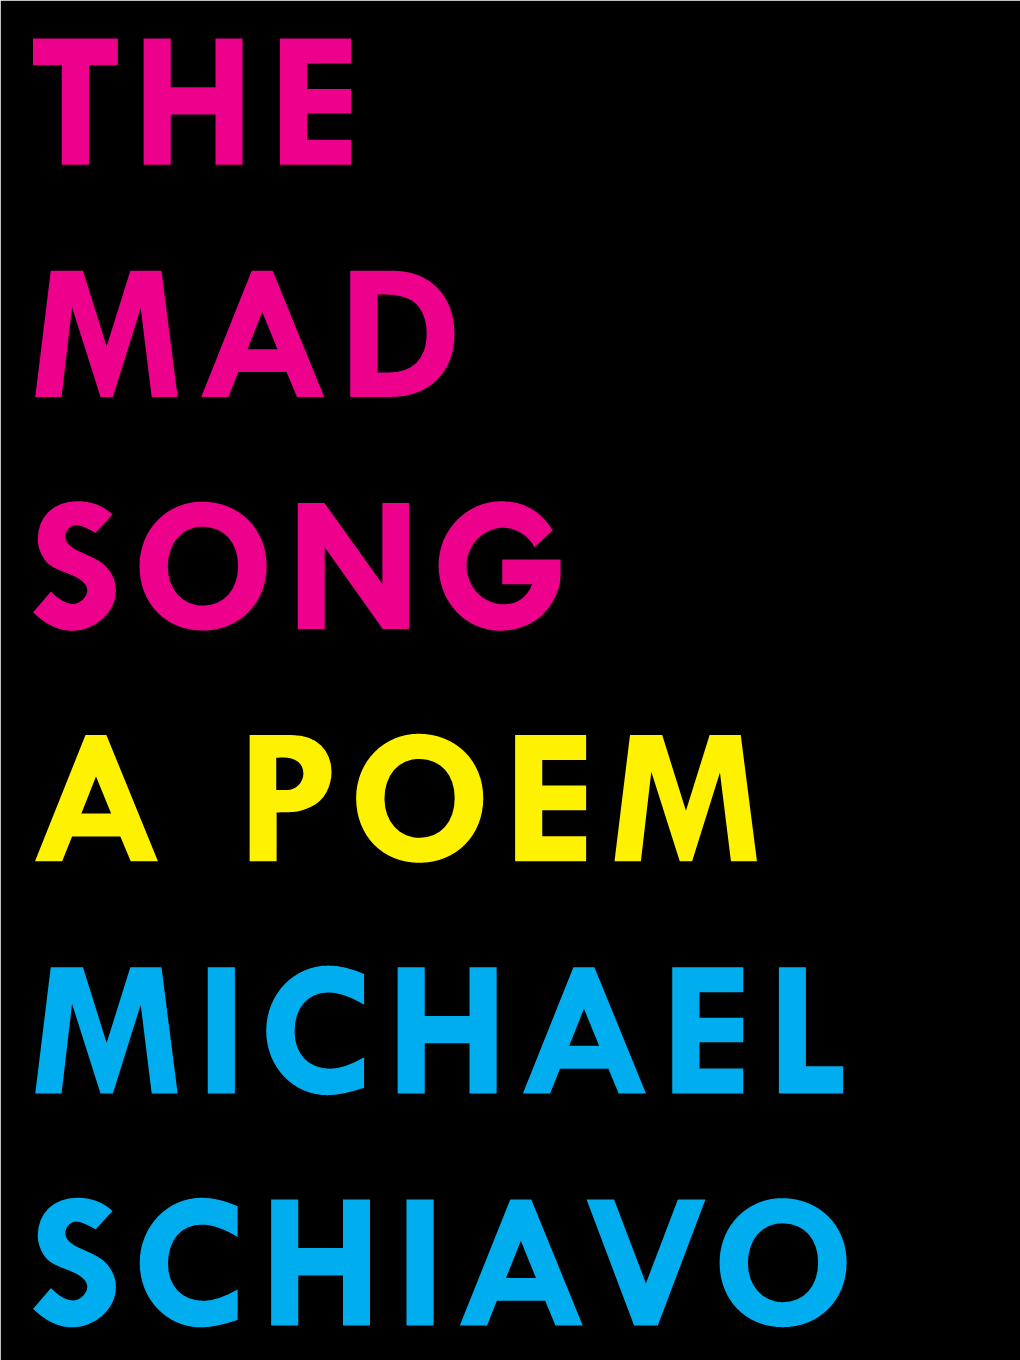 The Mad Song a Poem Michael Schiavo